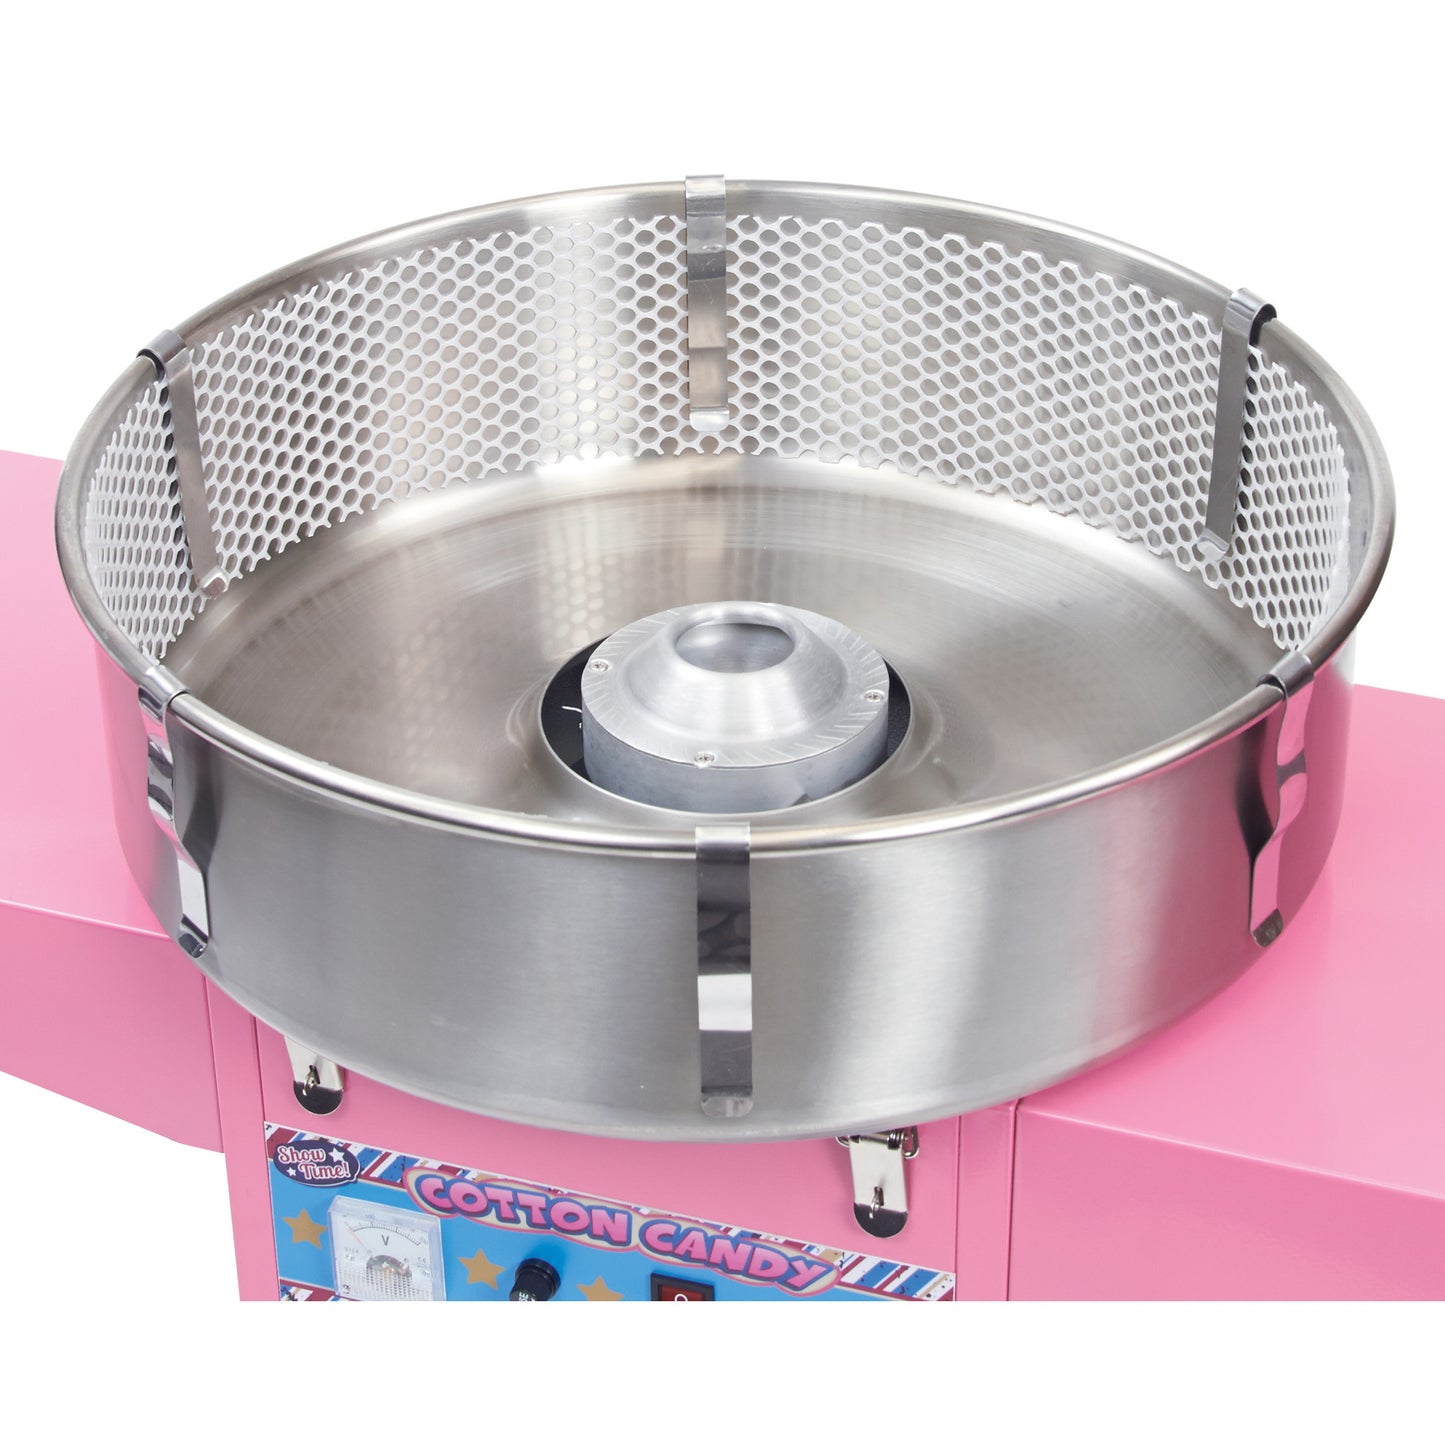 CCM28-P10 - Floss Stabilizer for Cotton Candy Machine